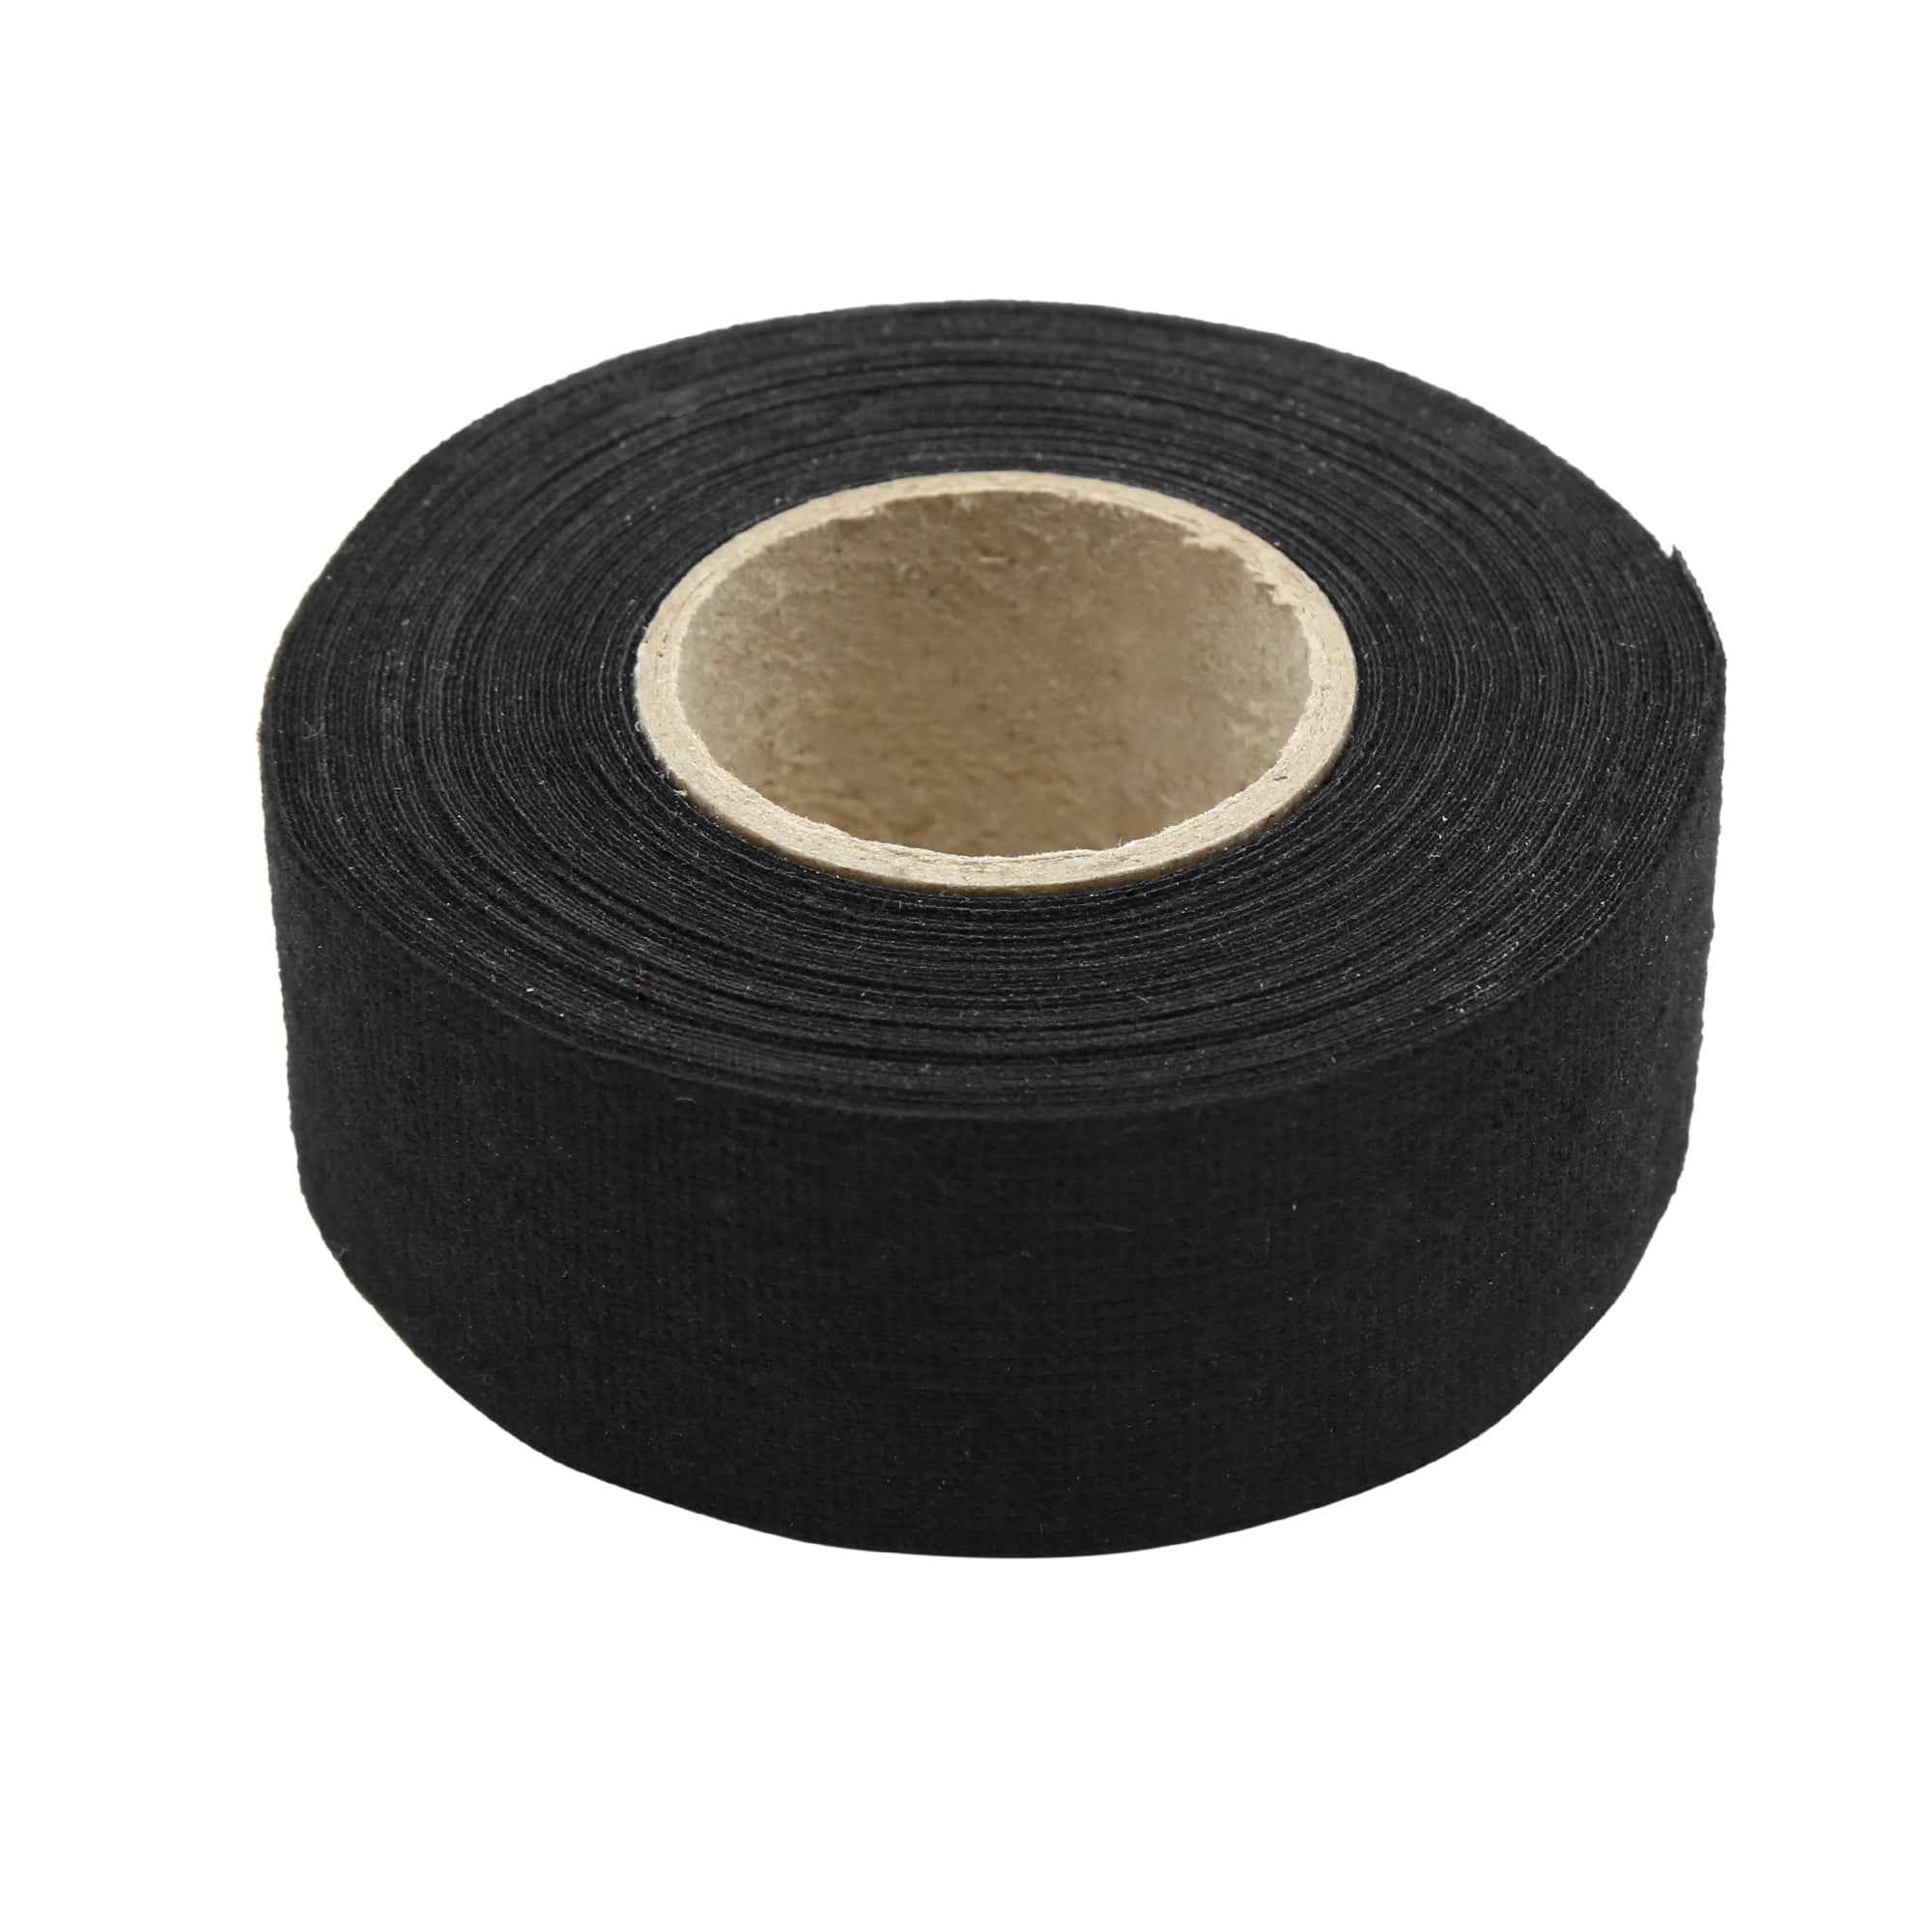 Universal rubber adhesive tape high temperature electrical tape 